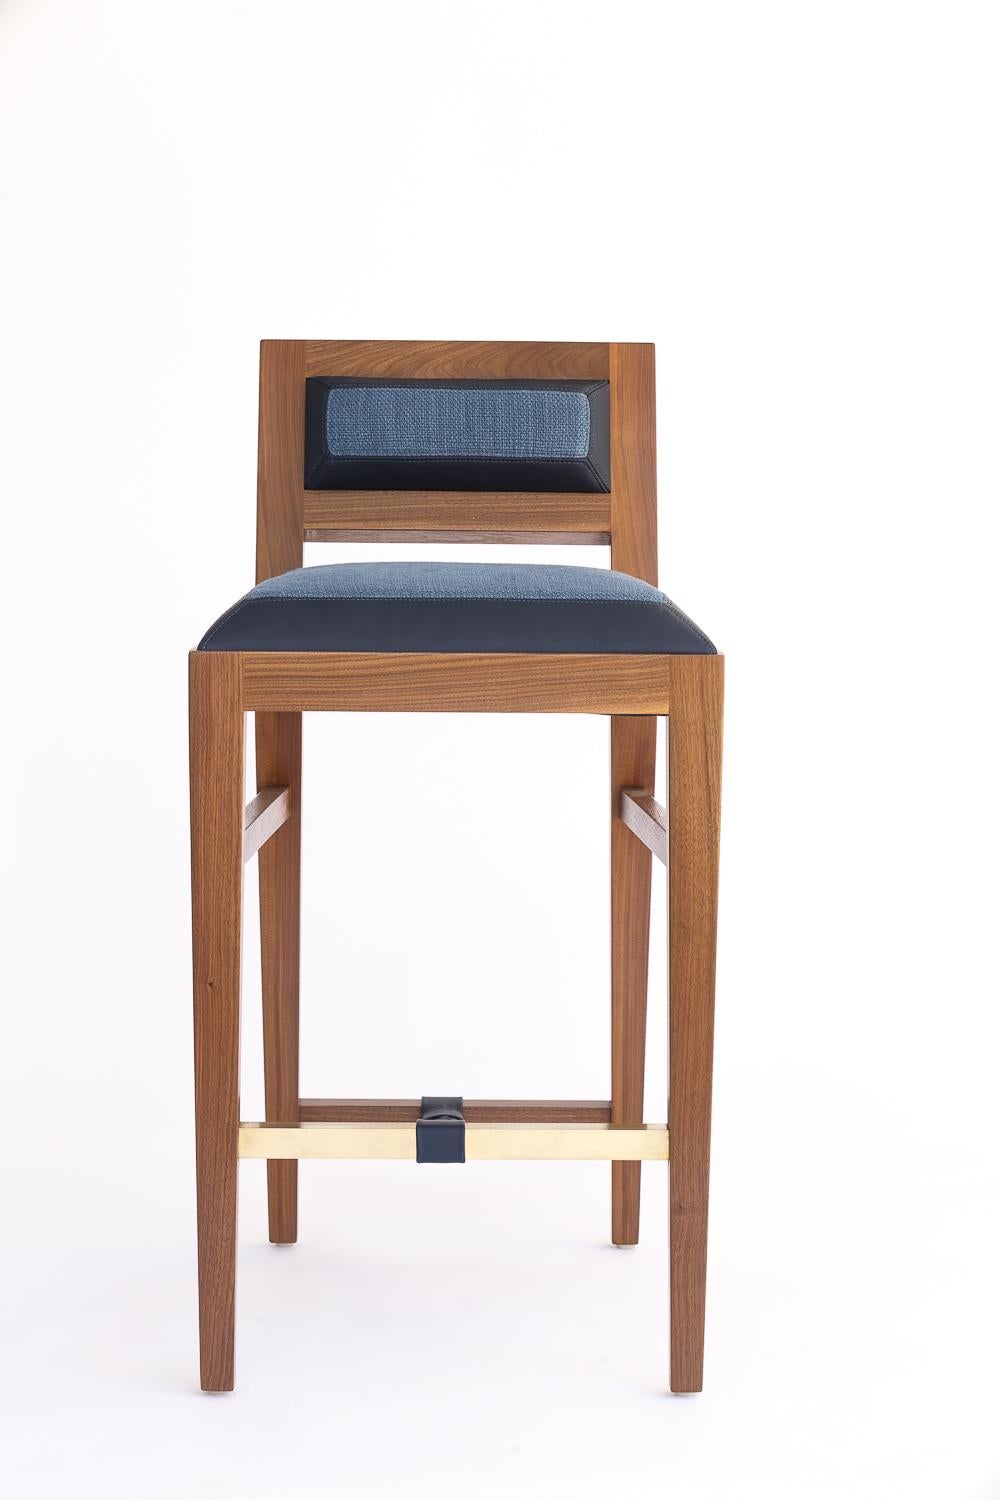 The solid walnut counter stool is handcrafted with traditional joinery. Shown in a combination of leather and fabric upholstery. This is a homage to 1940s French designer Jacques Adnet. Custom sizes and finishes available.